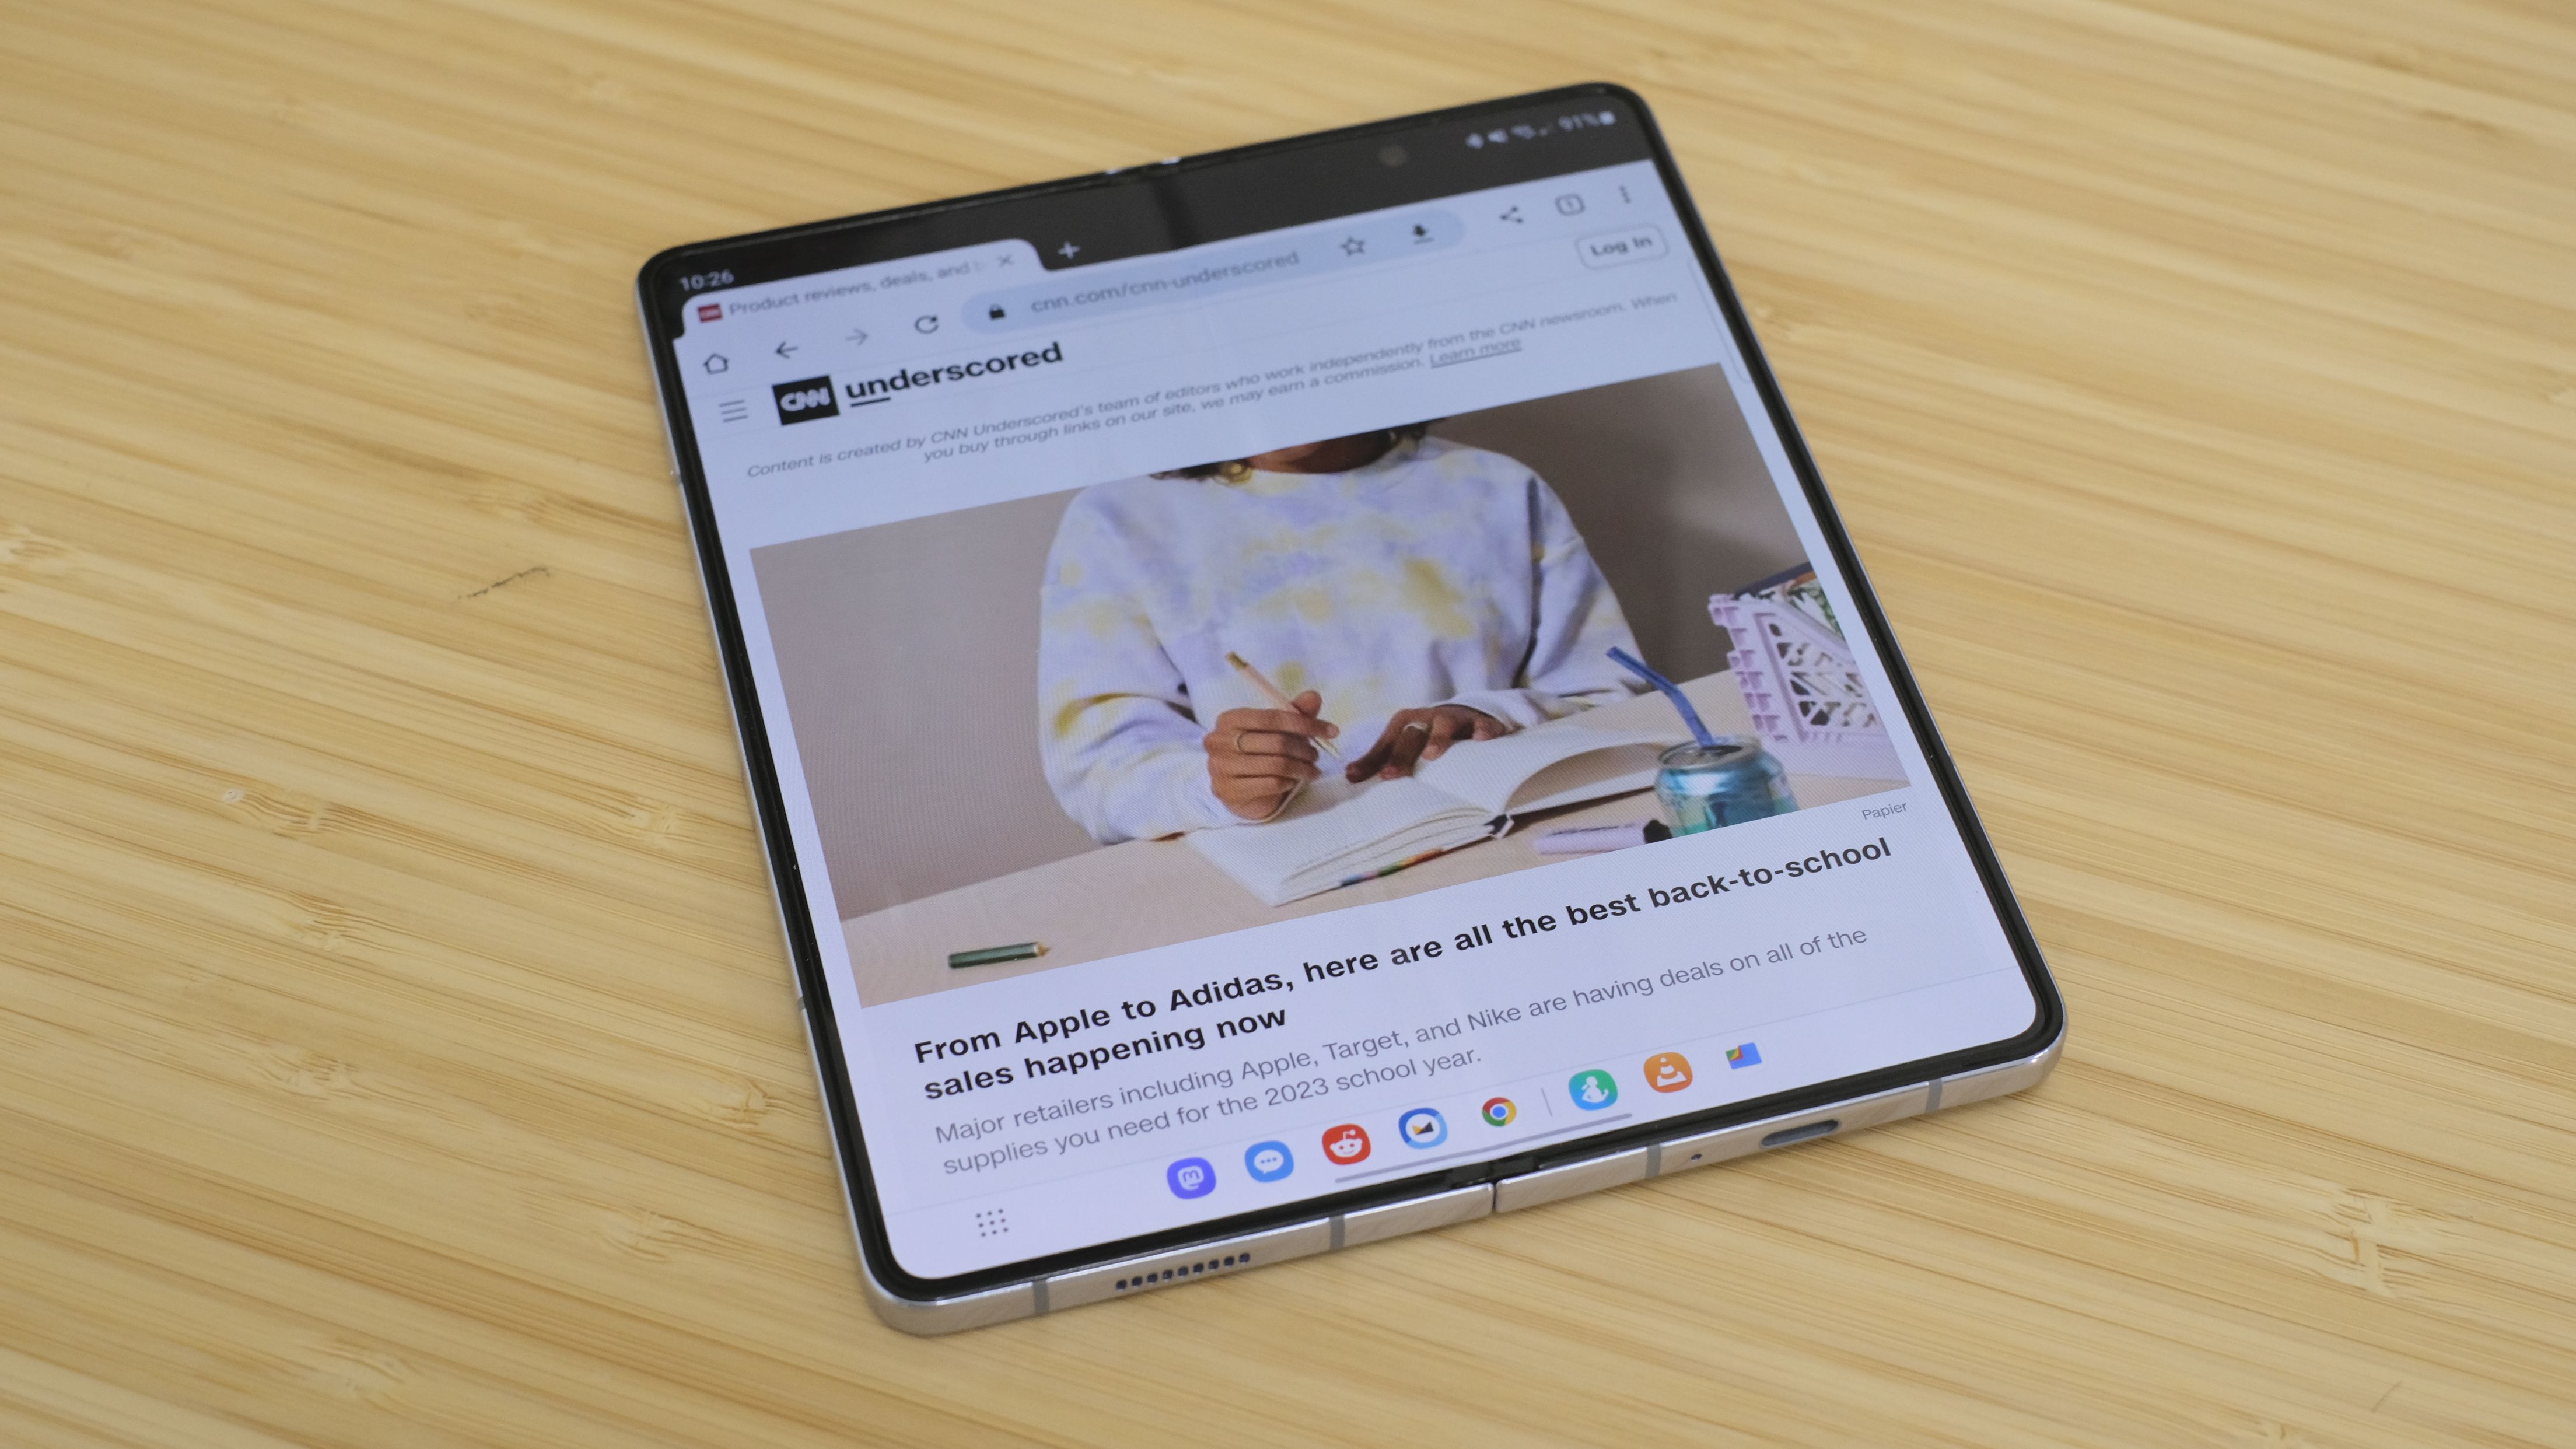 Samsung Galaxy Z Fold 3 review: A near-perfect foldable